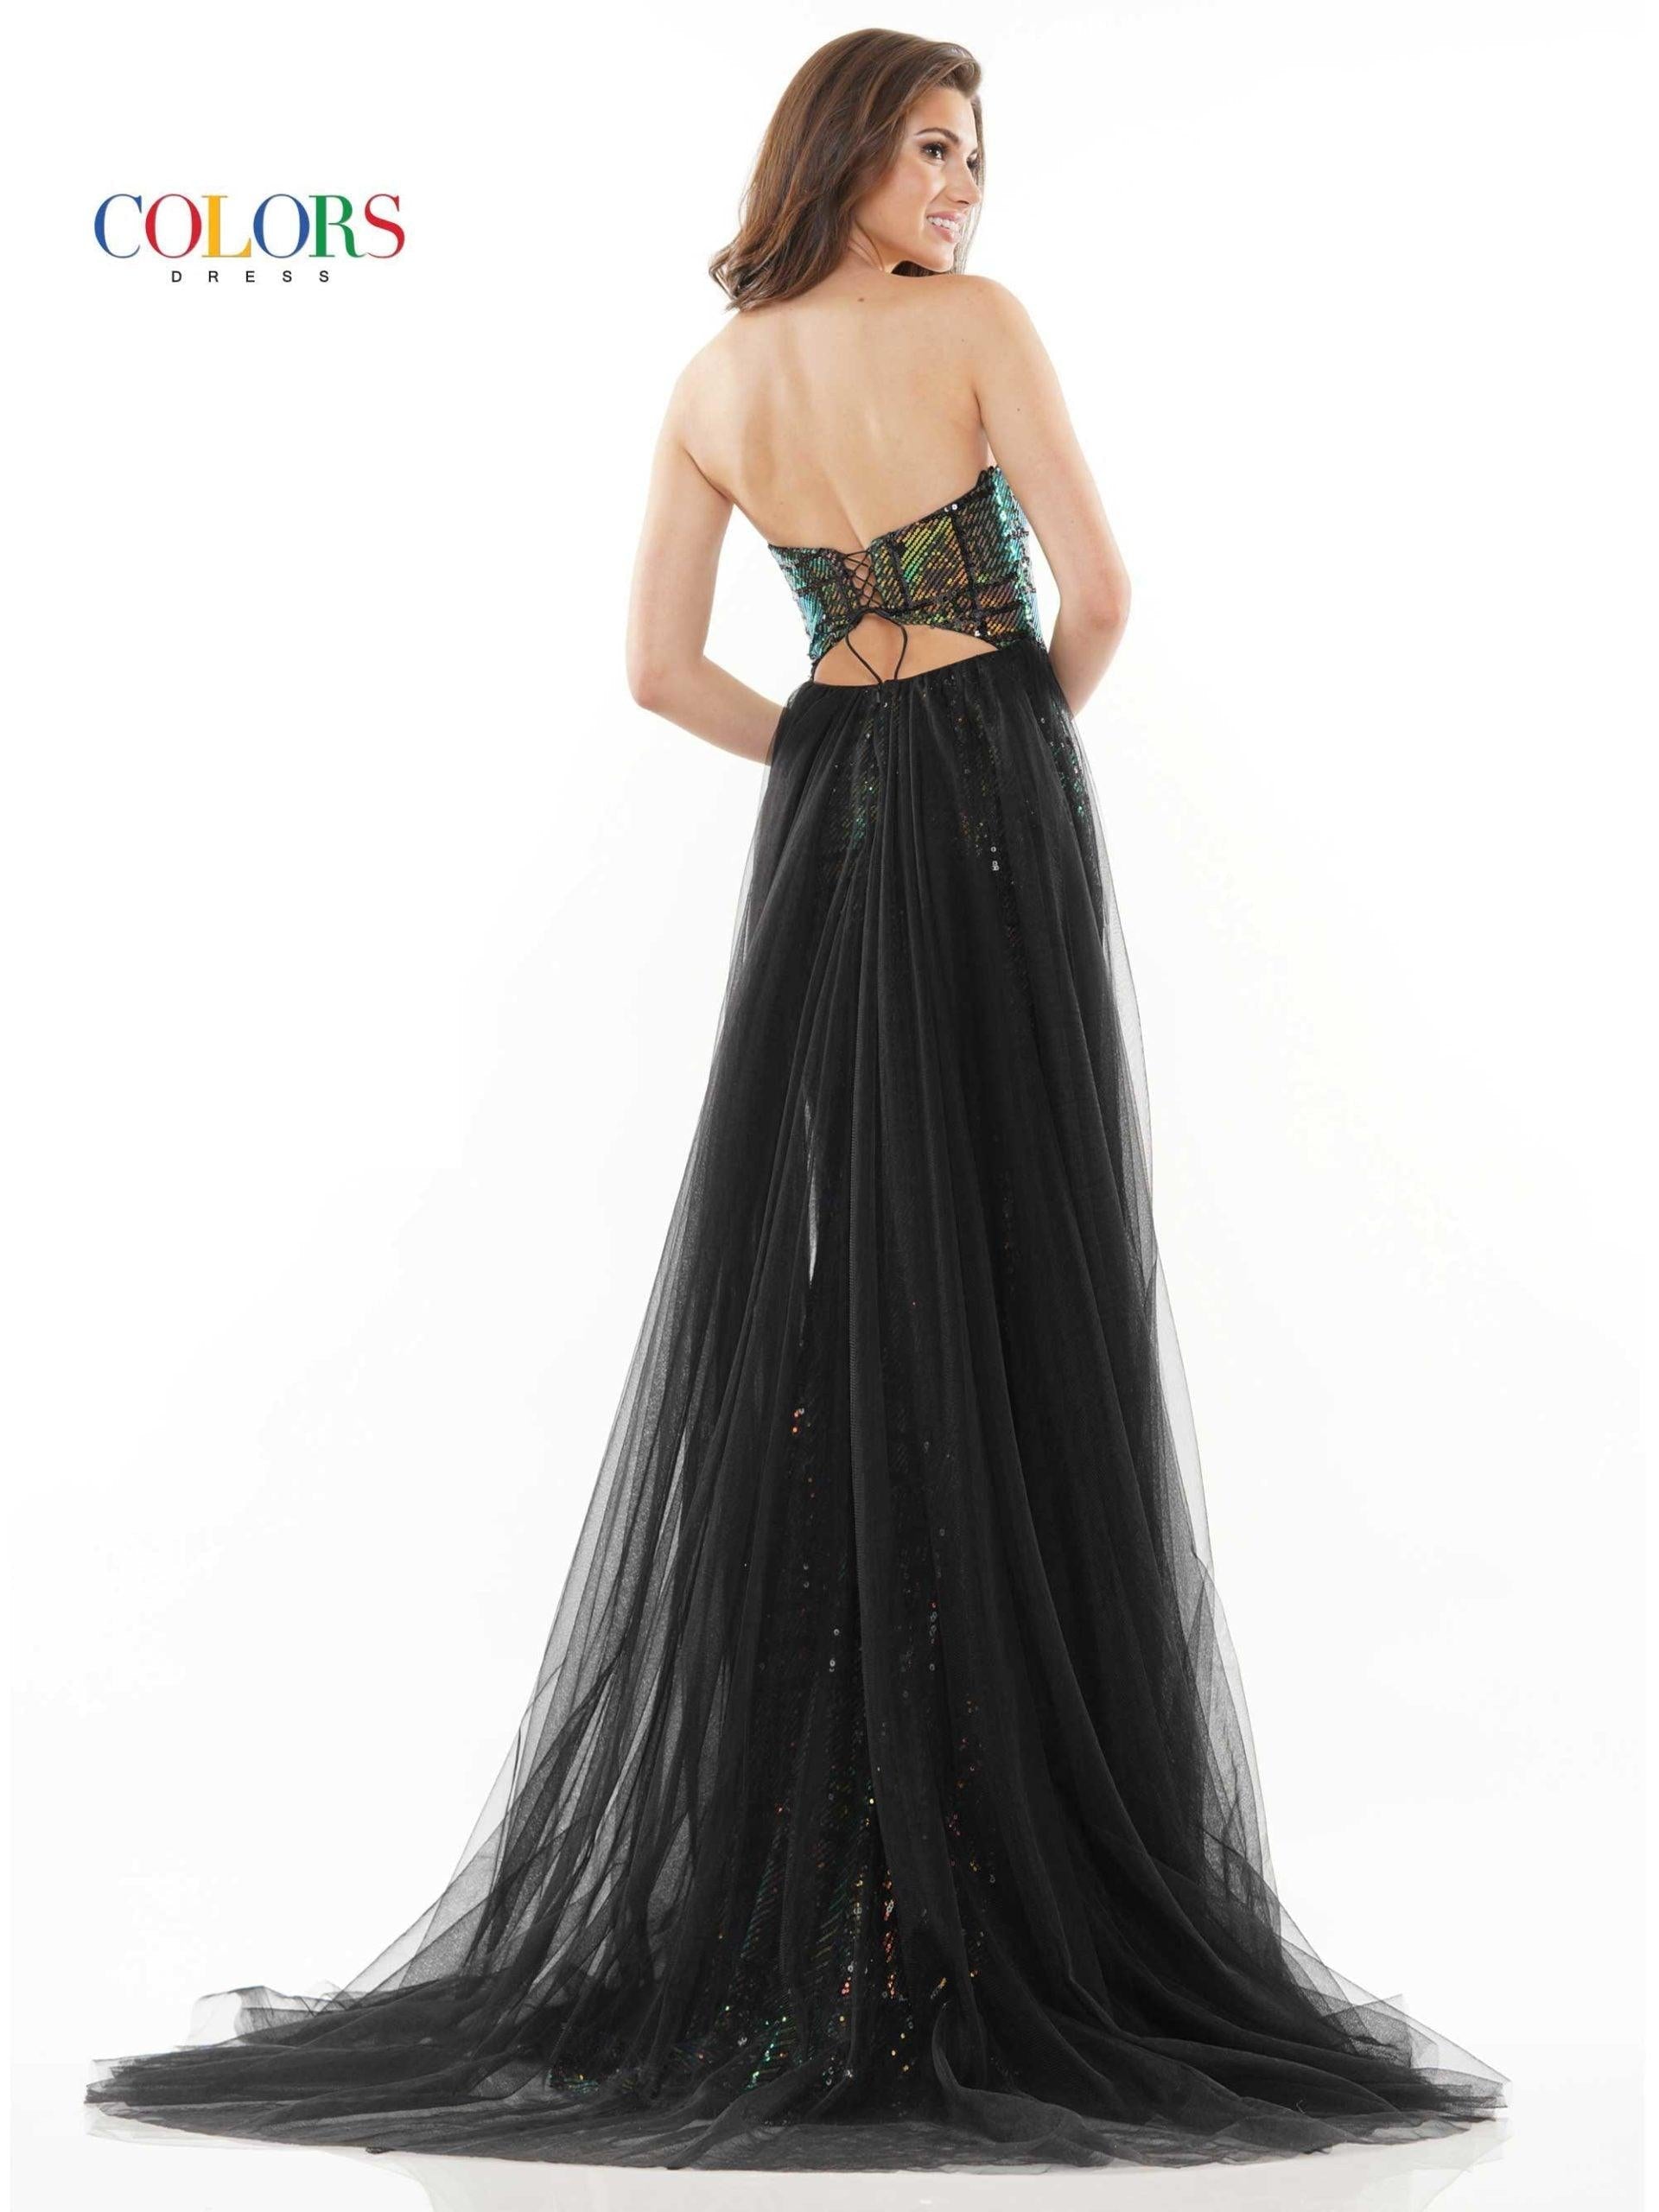 Colors Prom Long Strapless Formal Dress 1077 - The Dress Outlet